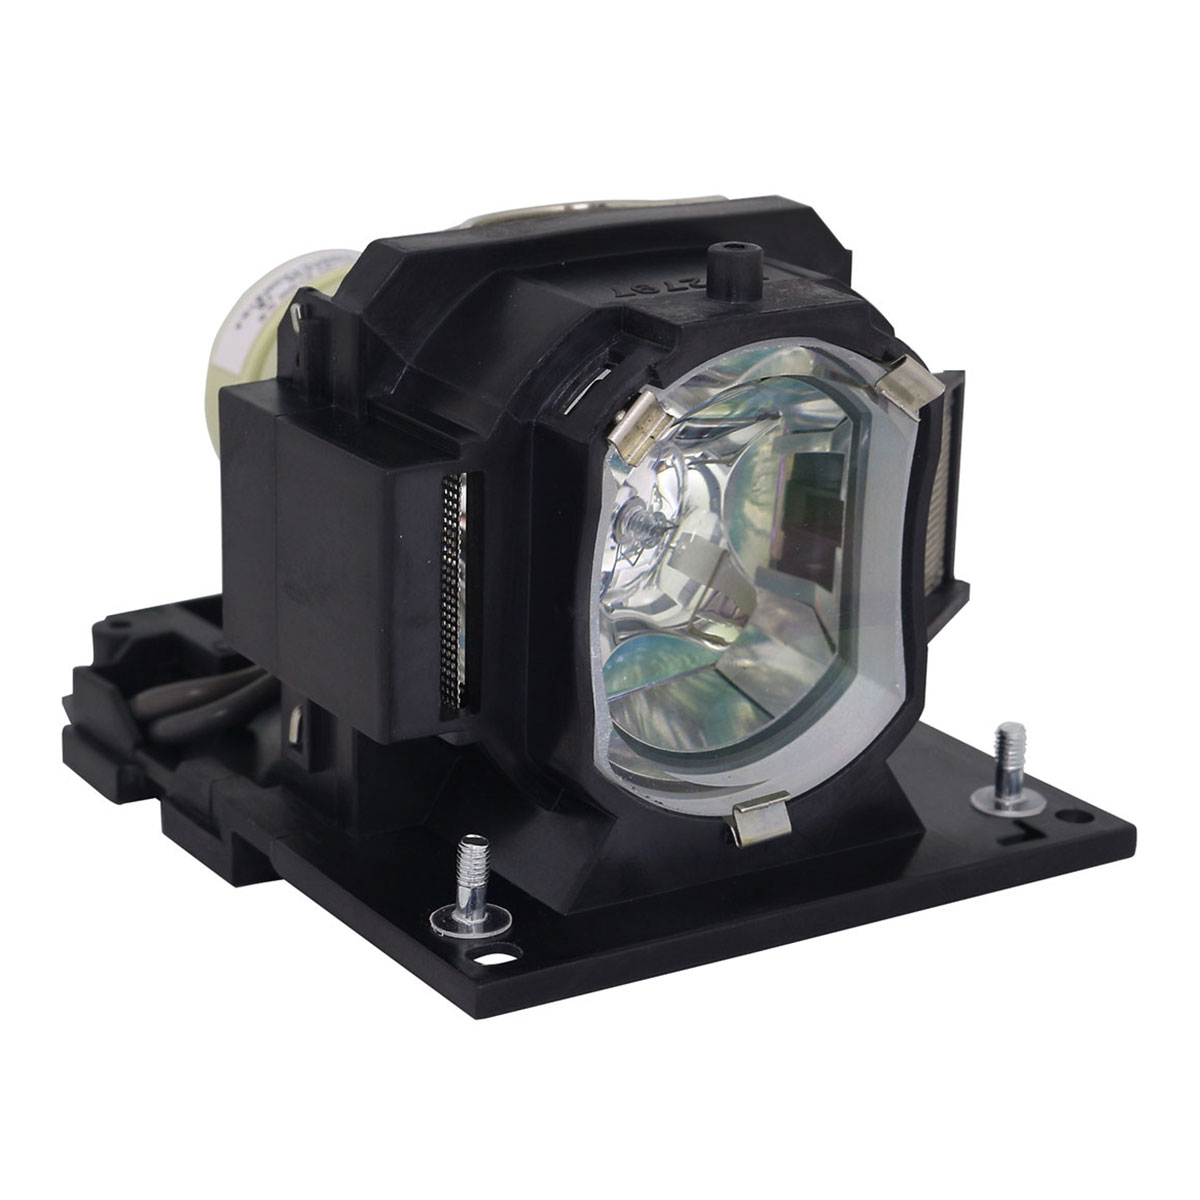 OEM DT01431 Replacement Lamp and Housing for Hitachi Projectors - image 3 of 7